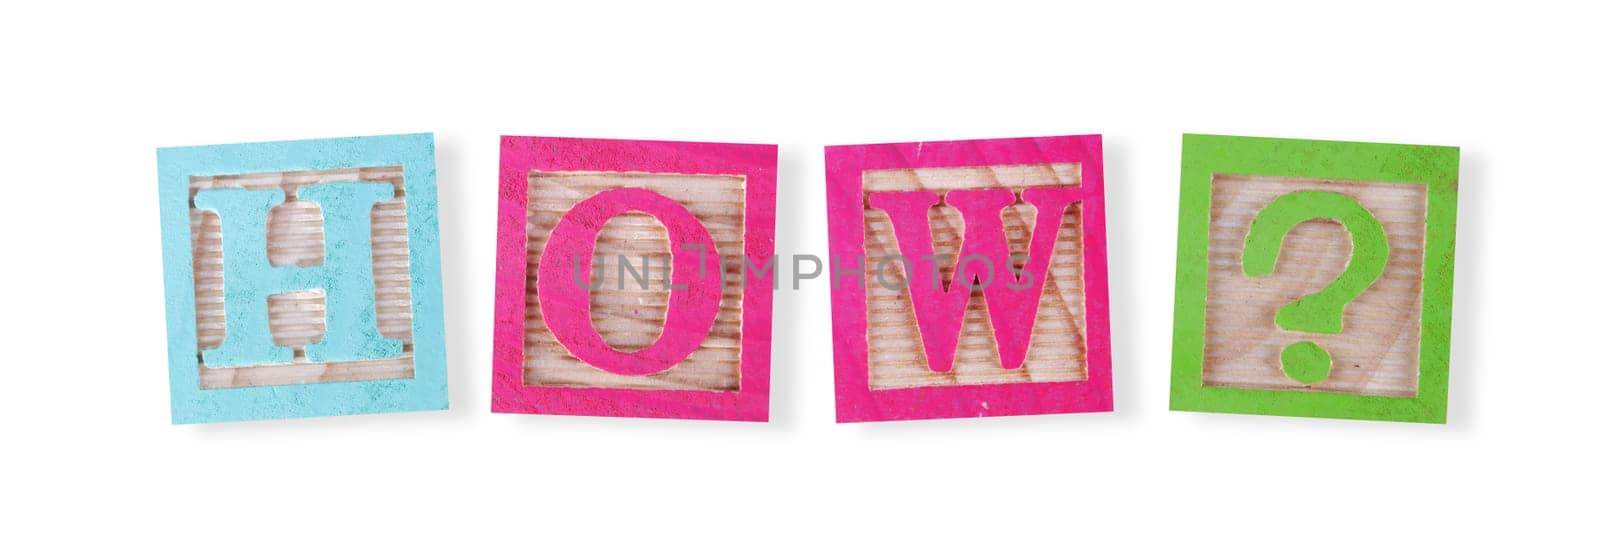 How concept with childs wood blocks by VivacityImages